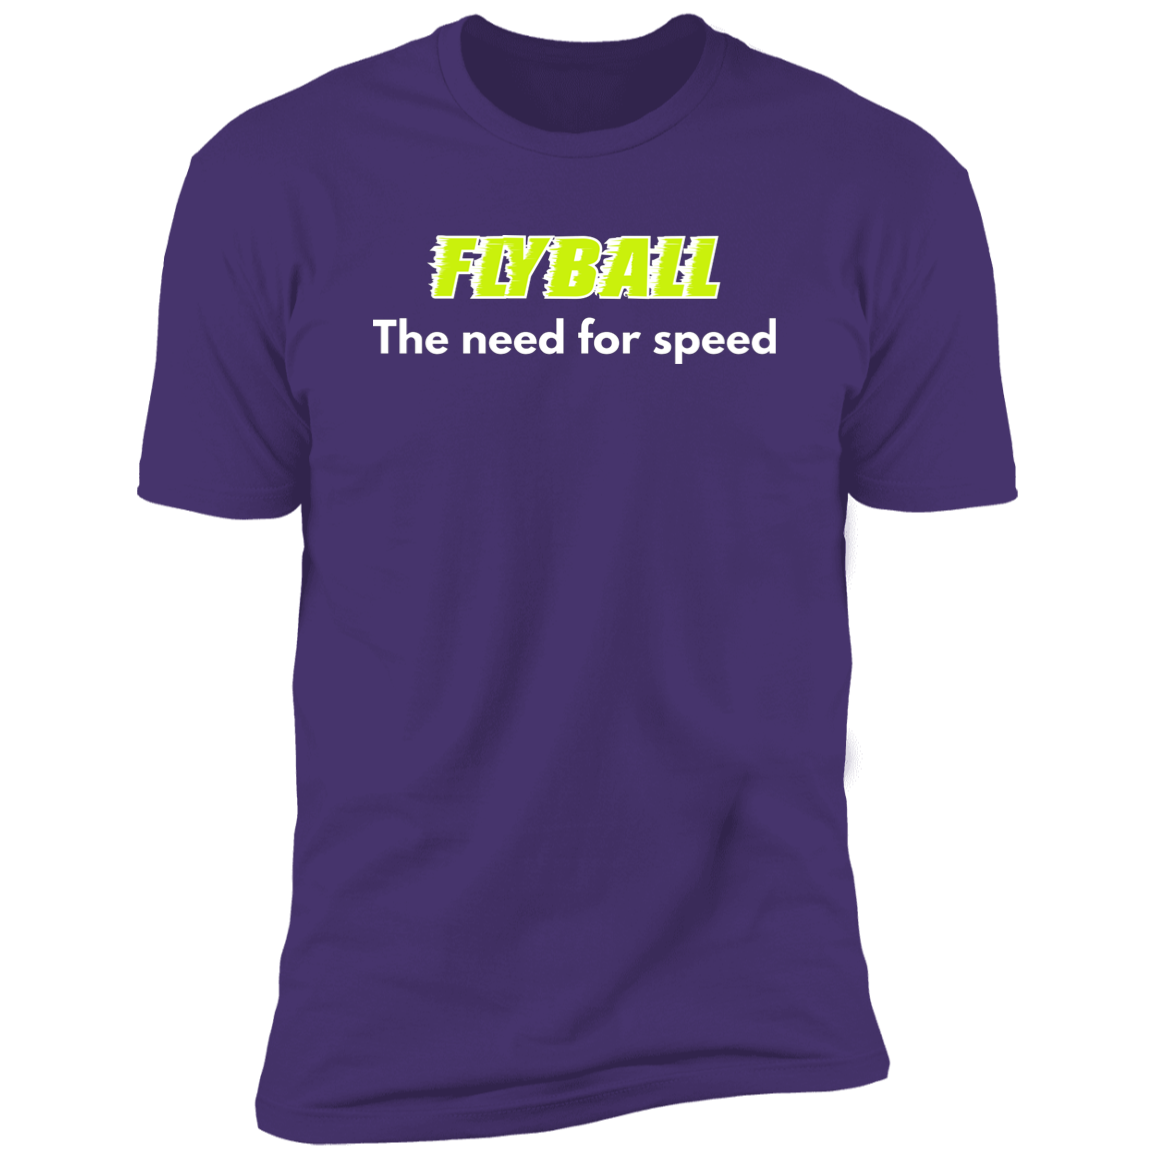 Flyball The Need For Speed dog shirt, dog shirt for humans, sporting dog shirt, in purple rush